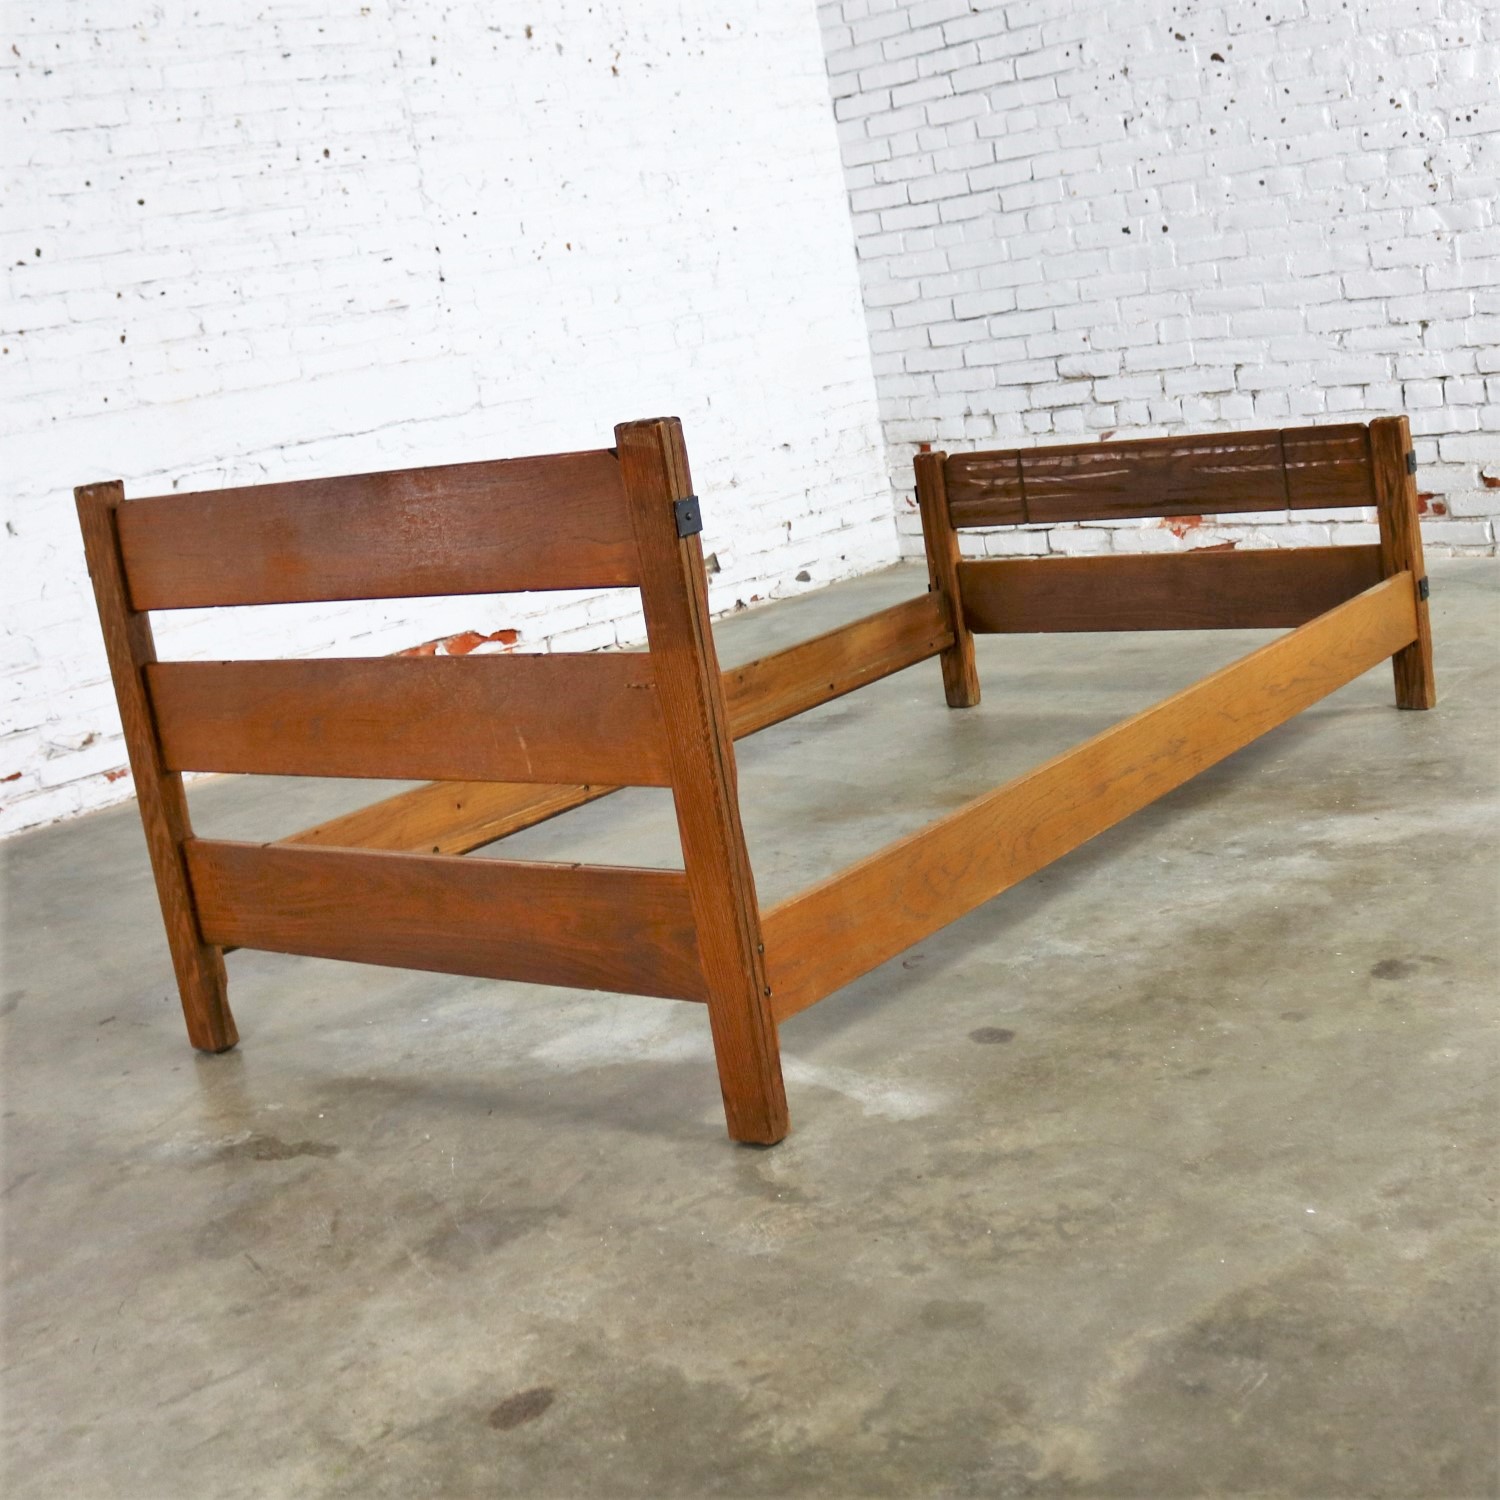 Four Ranch Oak Western Cowboy Twin Beds with Strap Details Attributed to A. Brandt Company